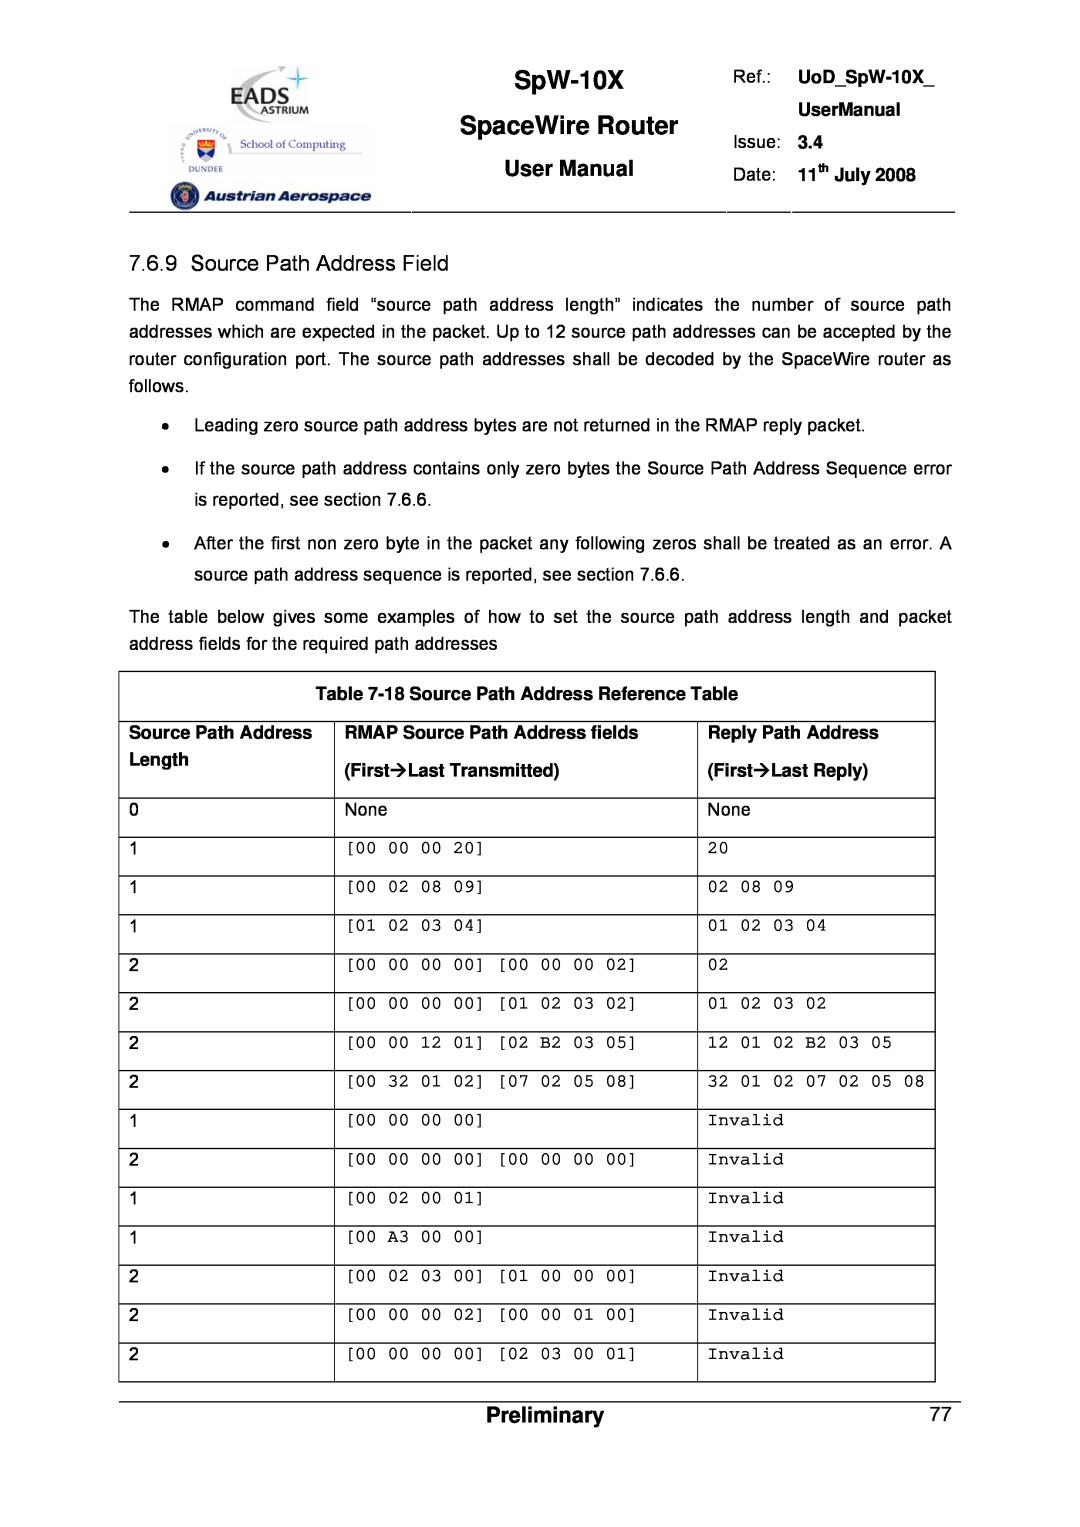 Atmel SpW-10X user manual Source Path Address Field, SpaceWire Router, User Manual, Preliminary 